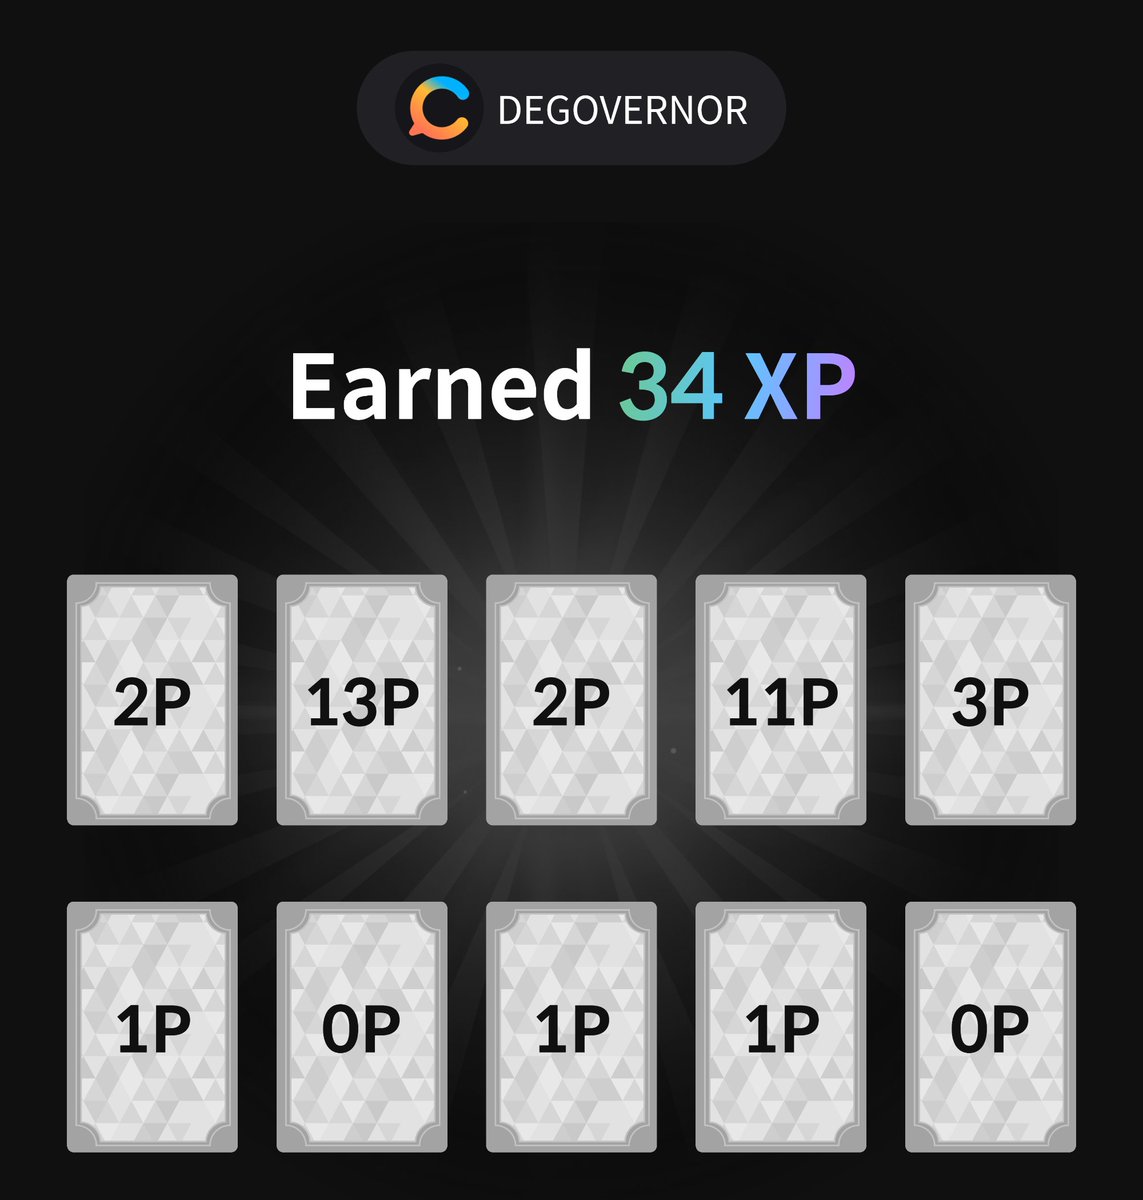 Don't be left out @coinlivespace

DEGOVERNOR earned 34 XP with #XRAirdrop!
#XREarlybirdAirdrop #XPCardPacks #XRADERS #XradersPoint #XR
Join now ▶️ bit.ly/XPcardpack